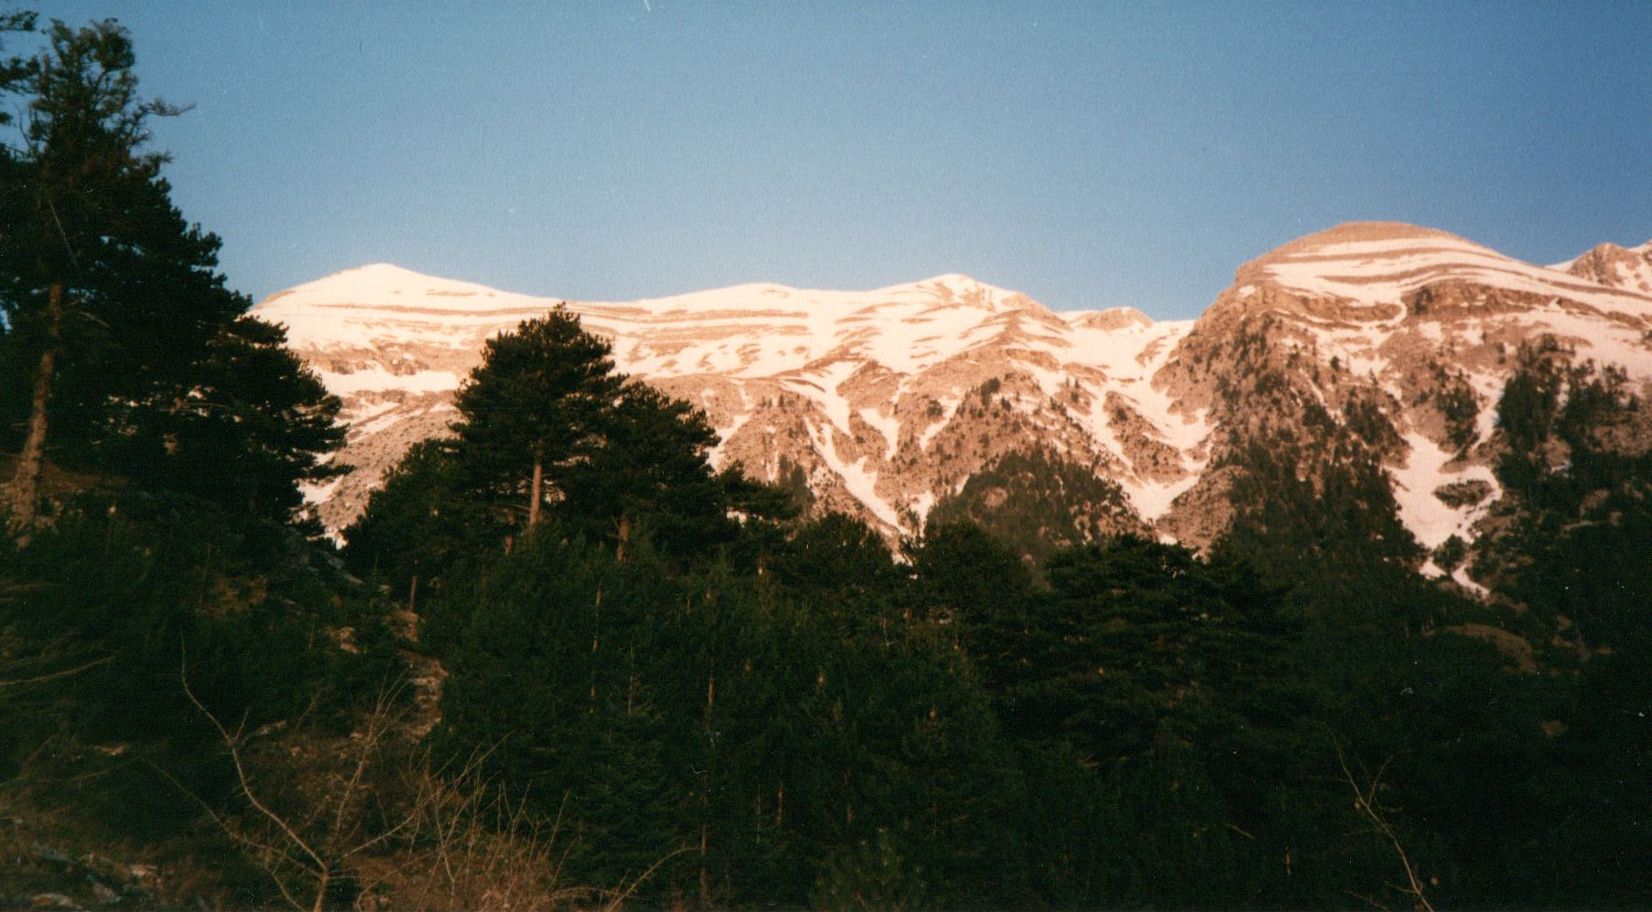 Taygettos Mountains in the Peleponnese of Greece